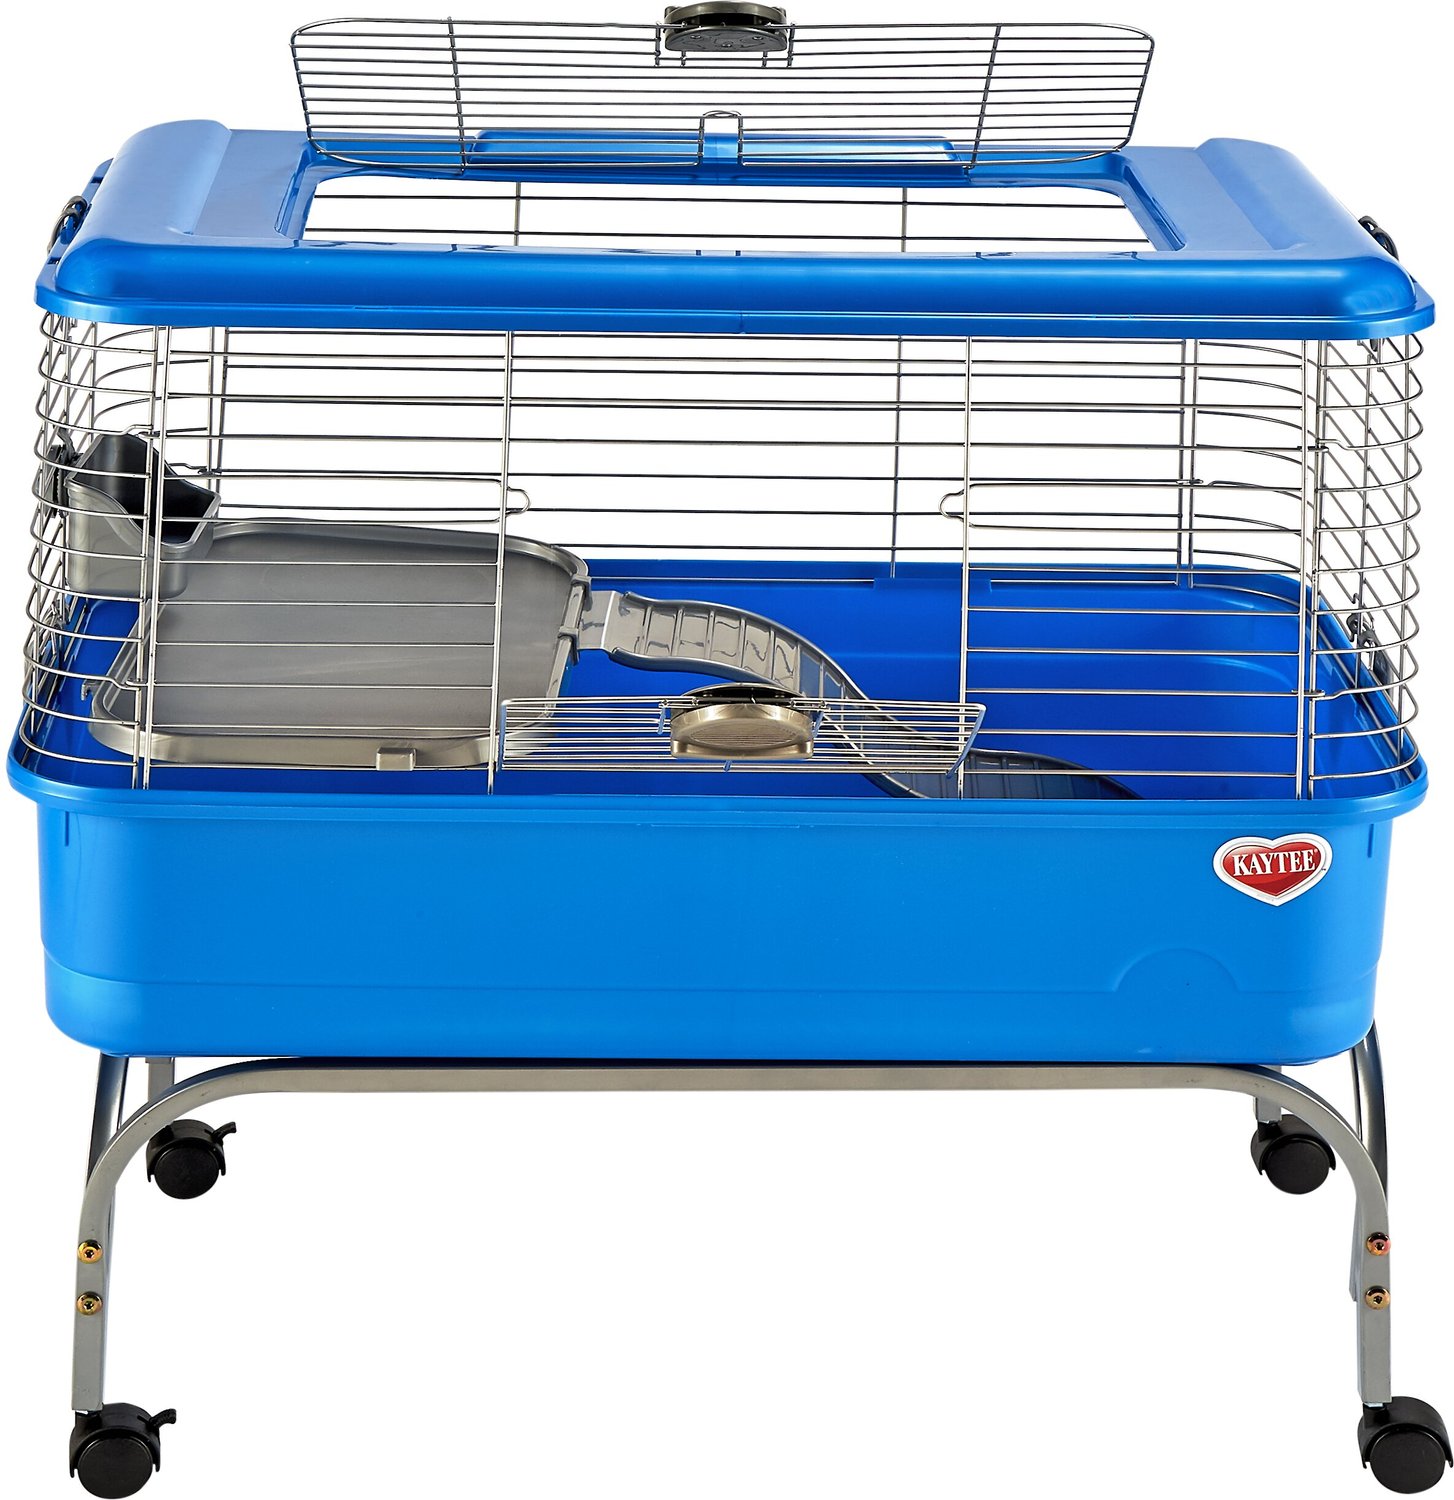 cheap guinea pig cages